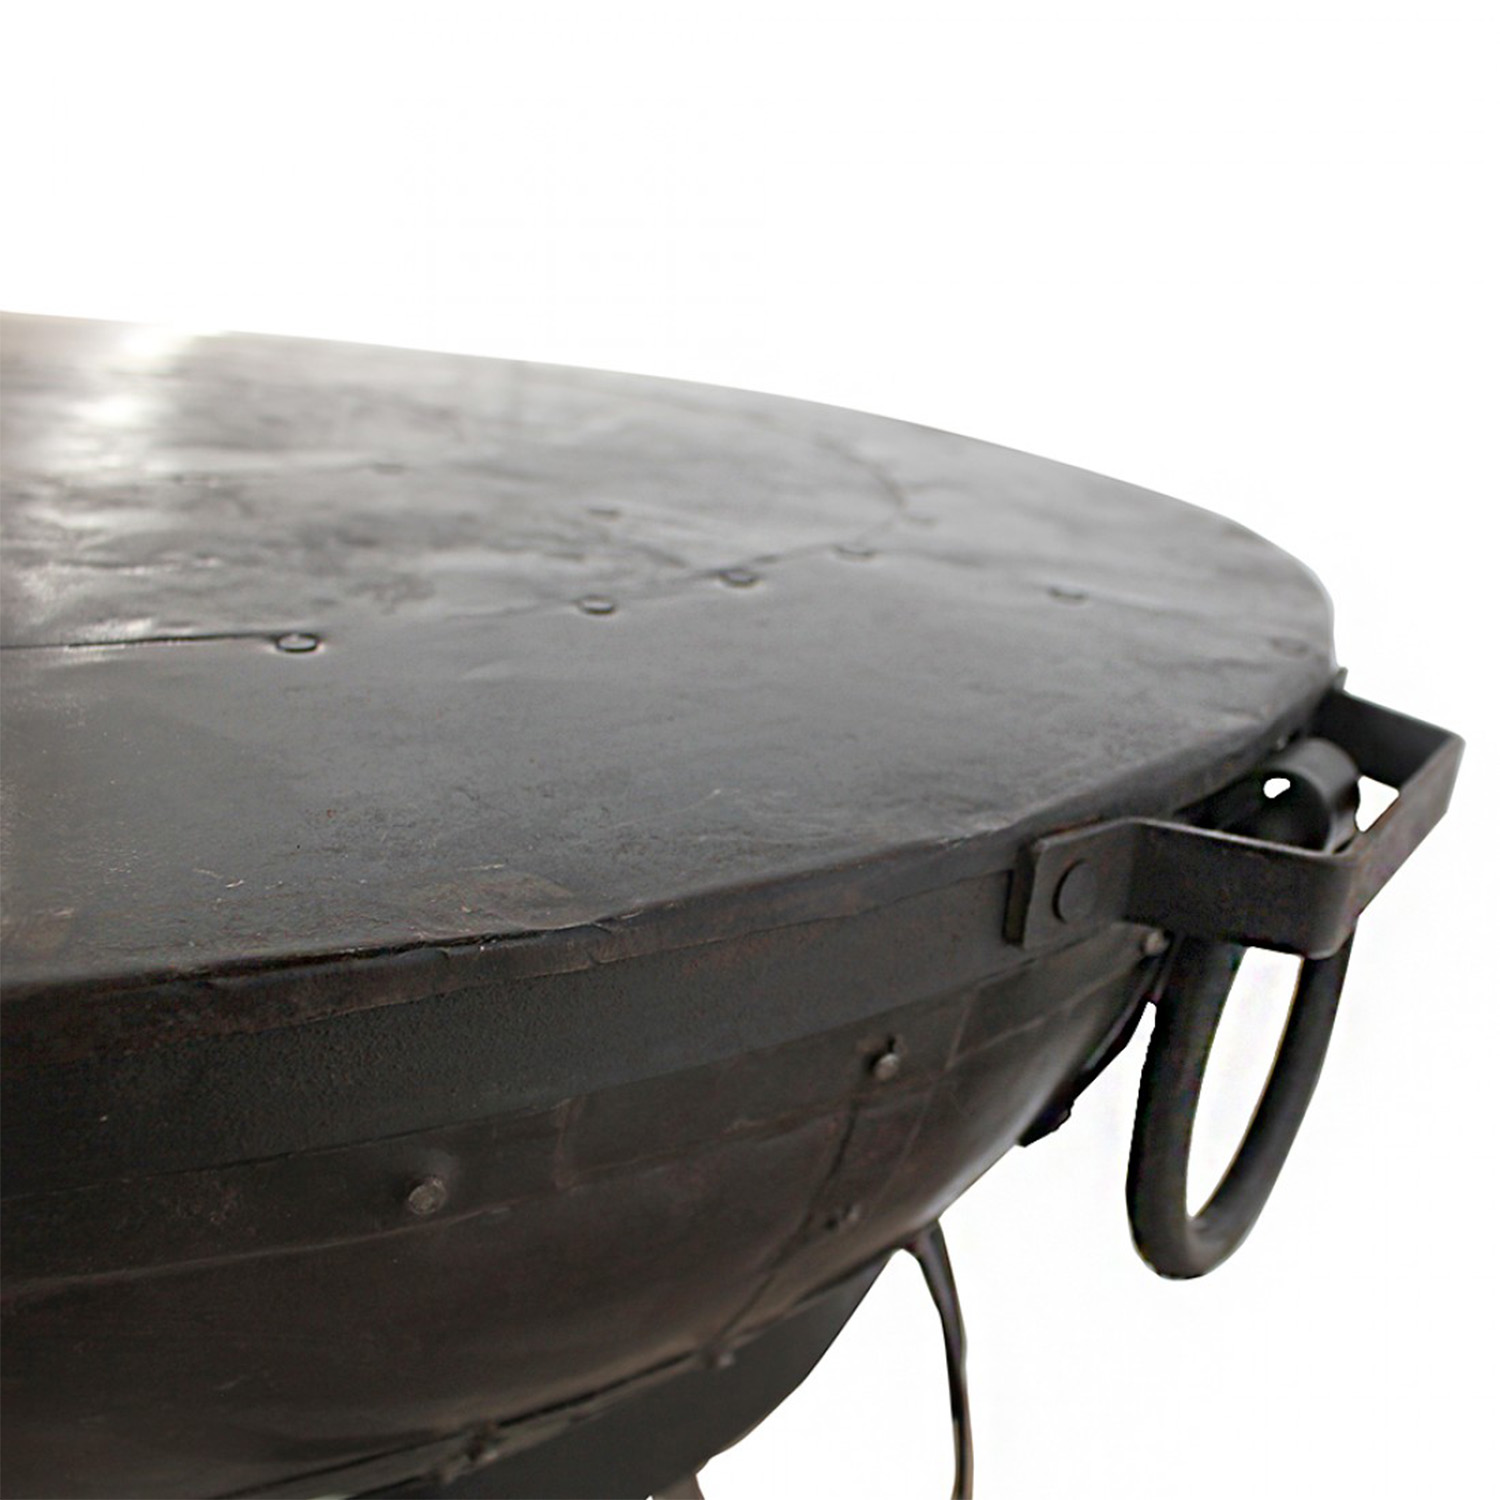 An image of Kadai Fire Bowl Shield - Available in Three Sizes - For Kadai 60cm Bowl